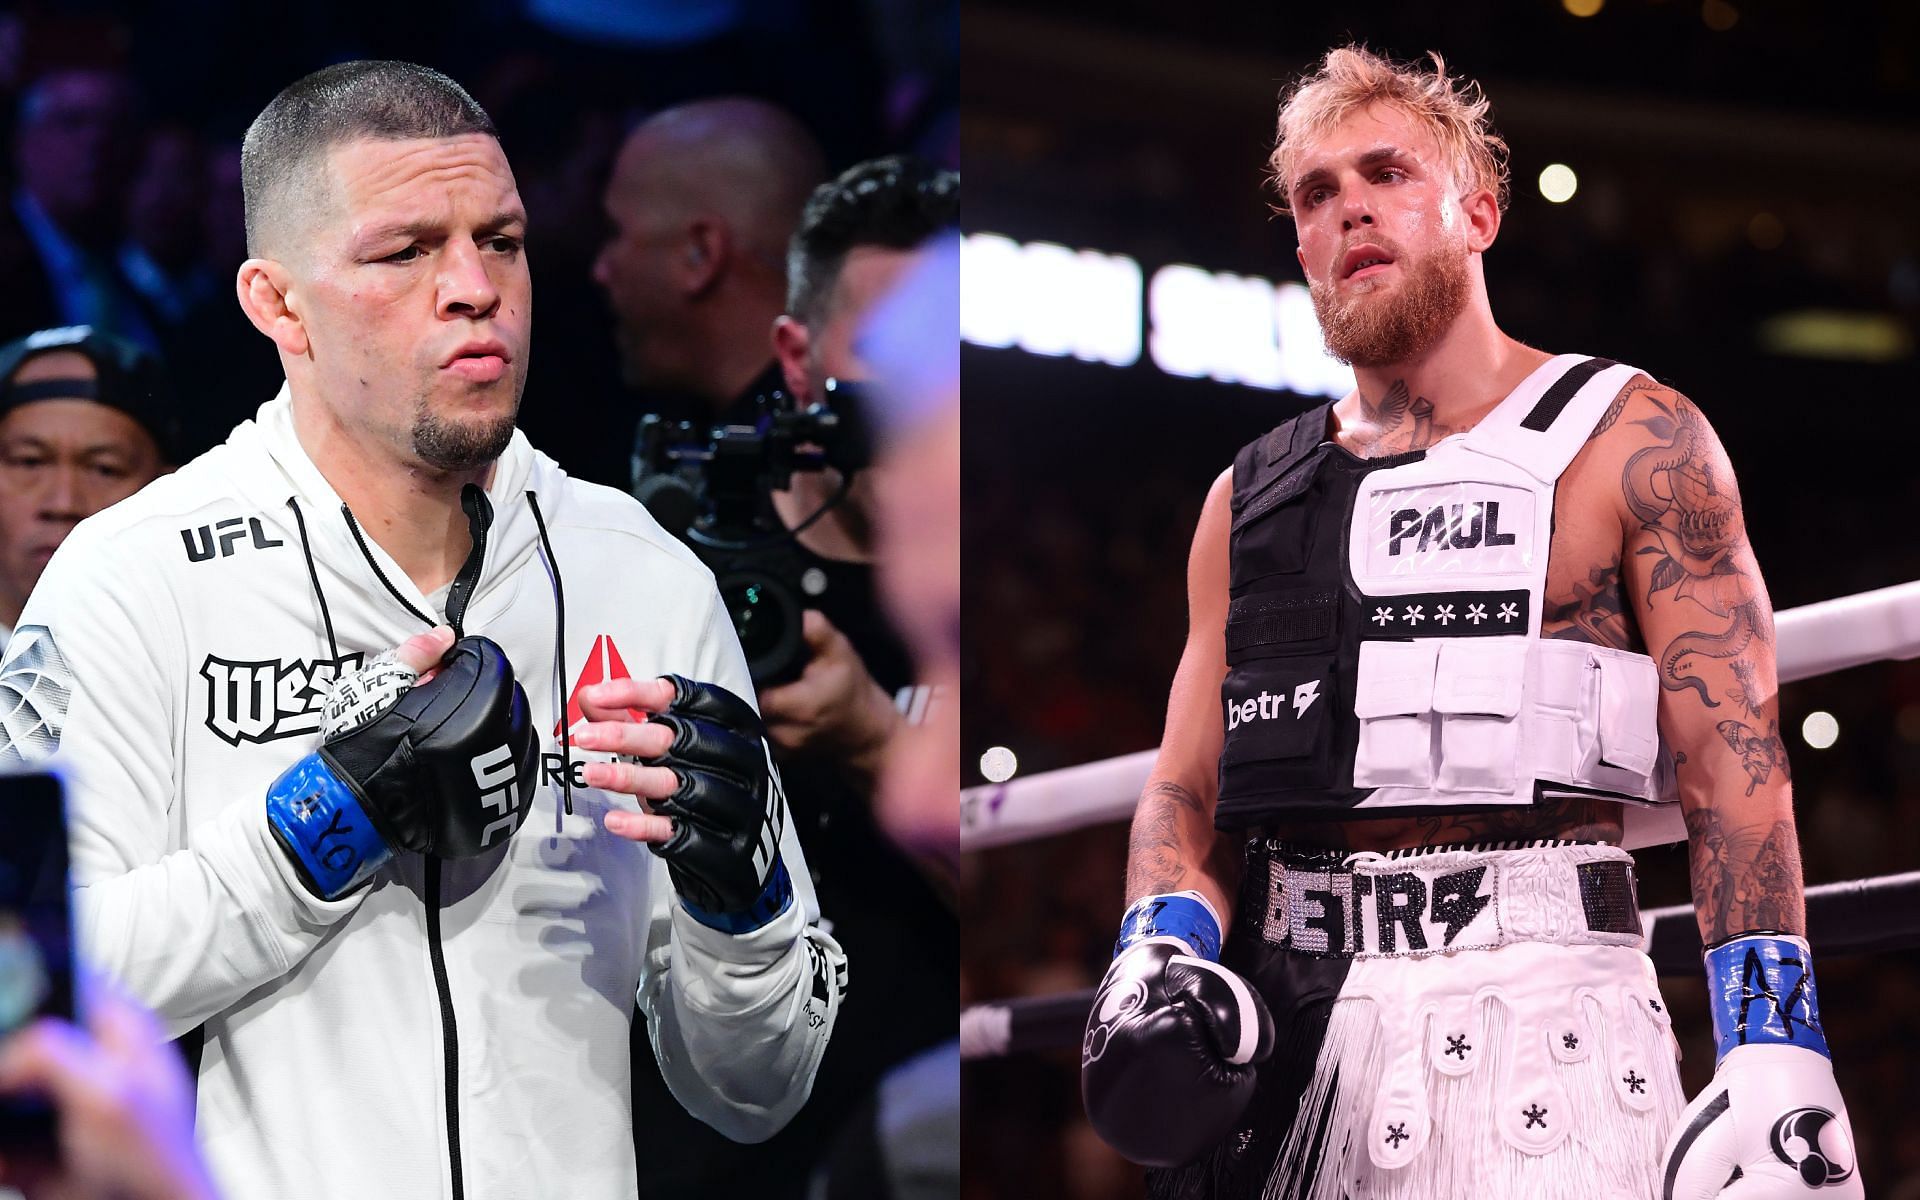 Nate Diaz (left) and Jake Paul (right) [Image Courtesy: Getty Images]